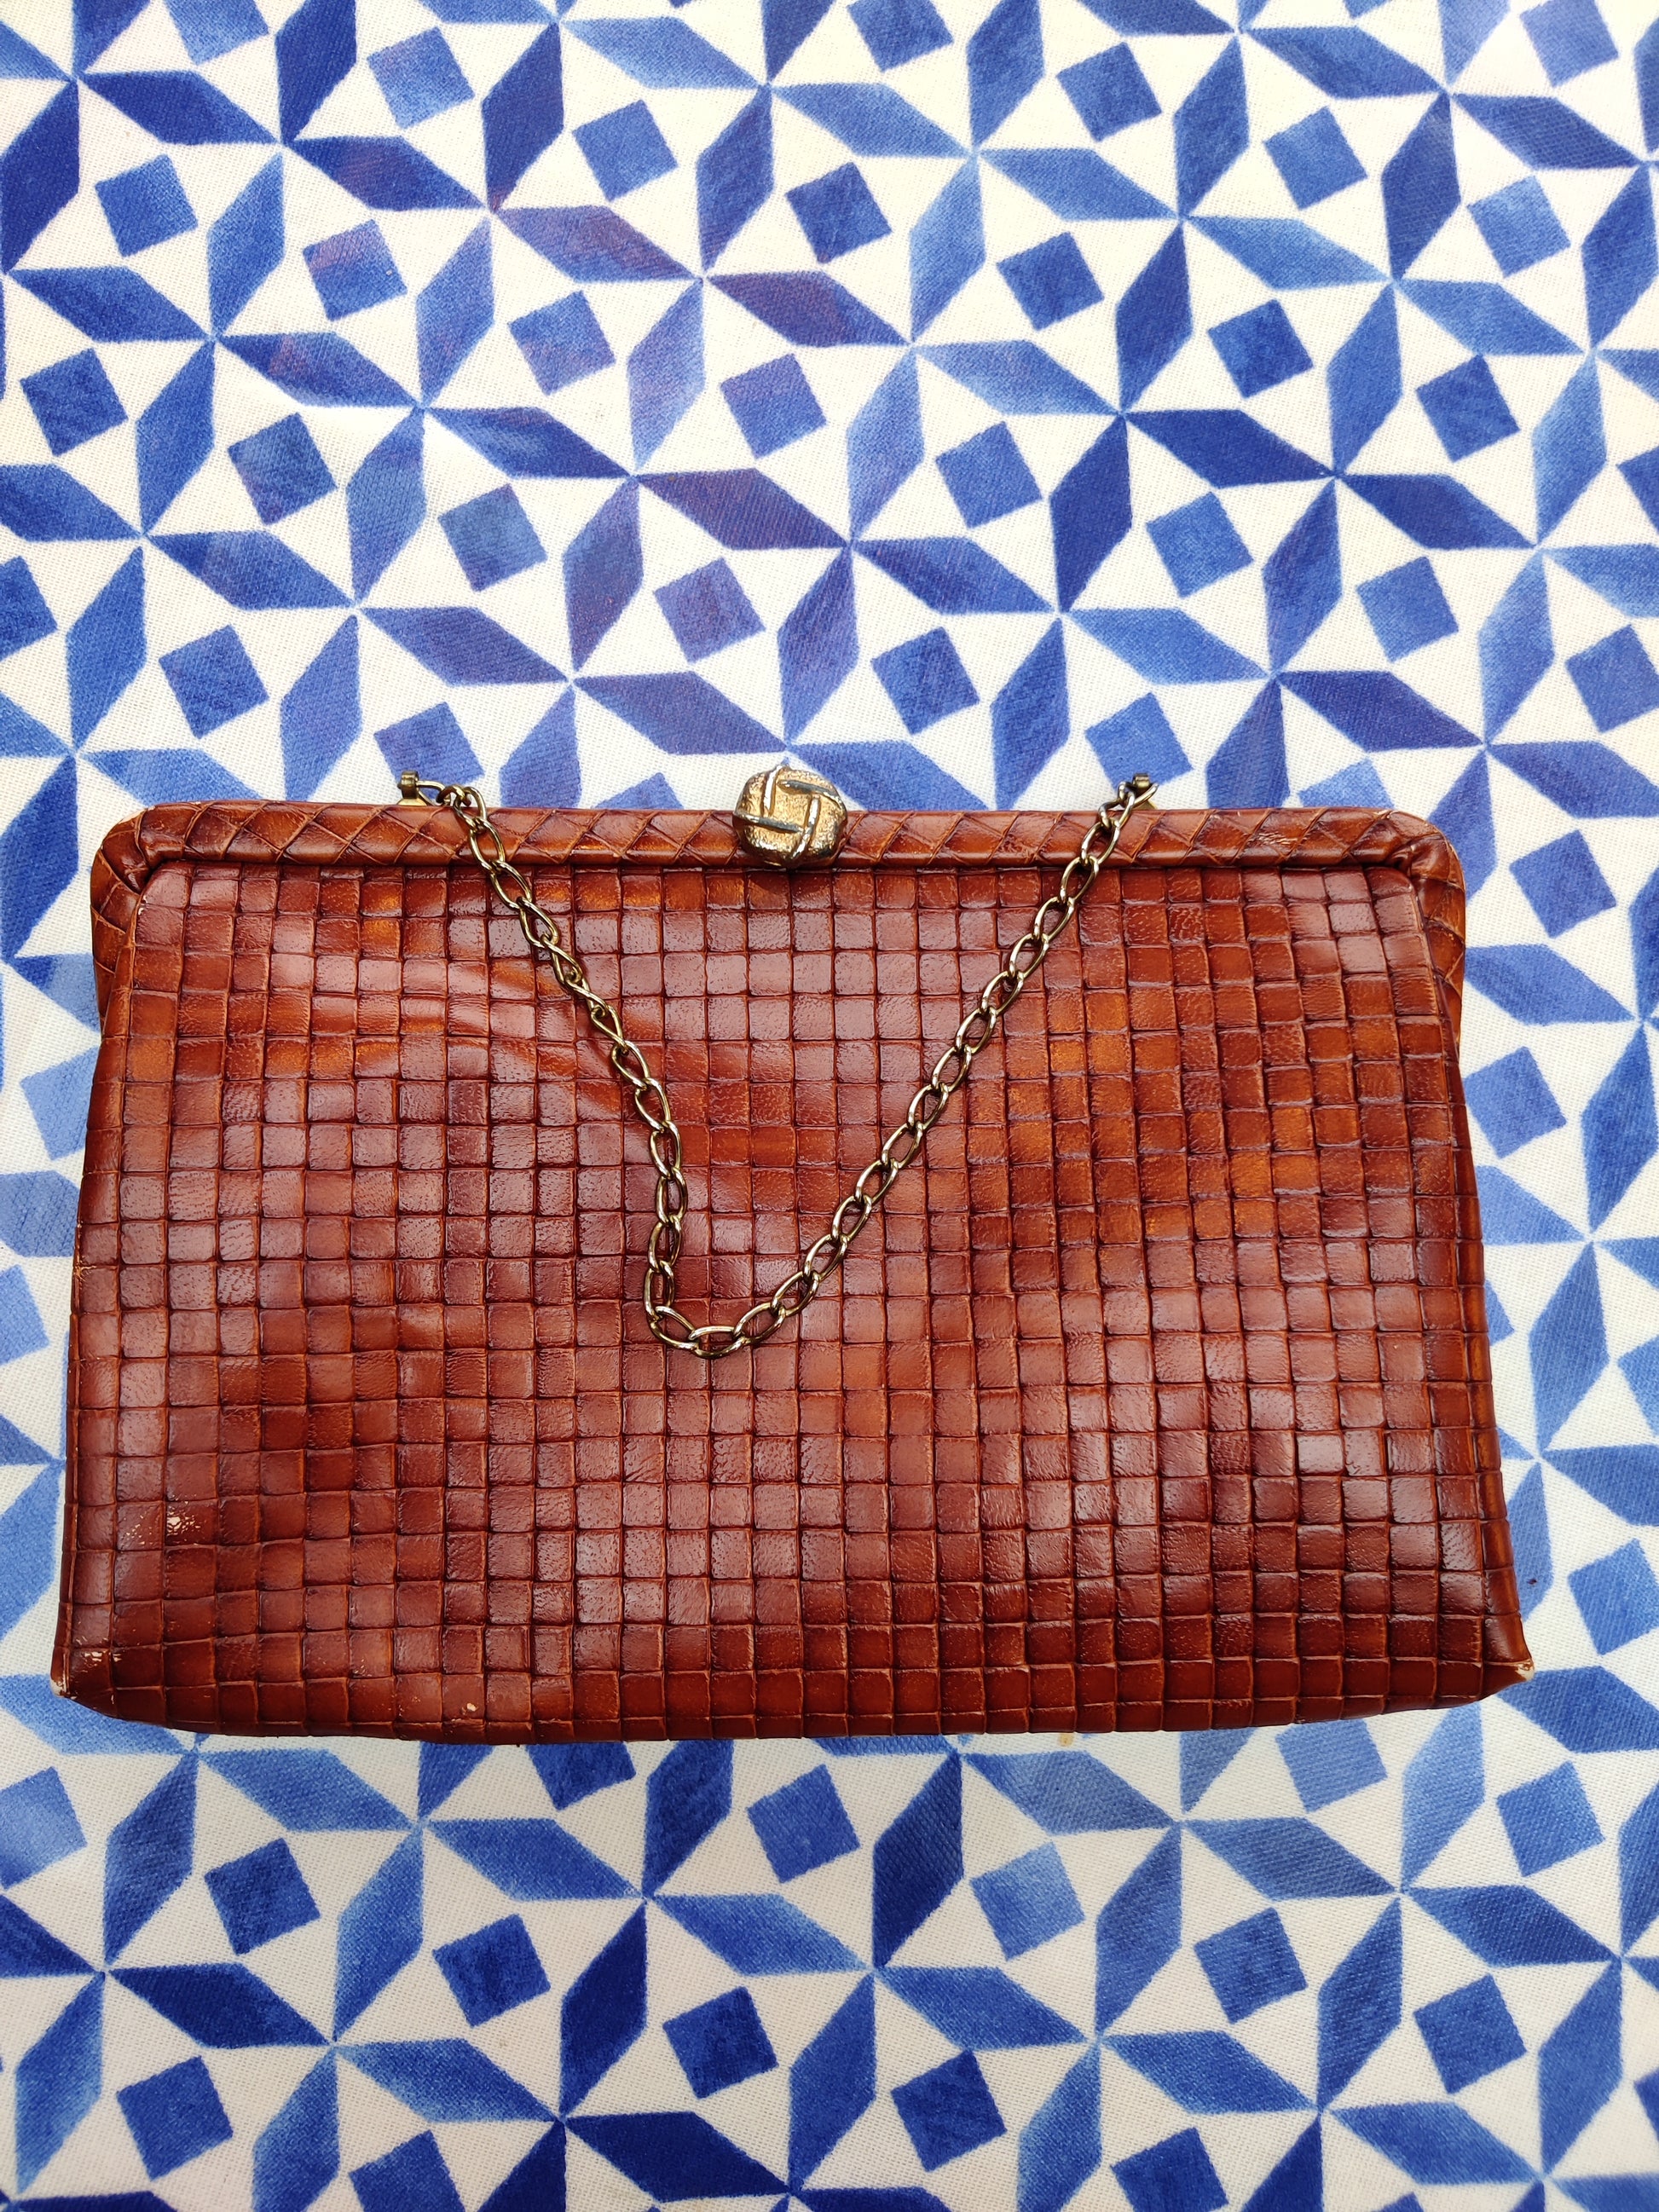 Vintage woven leather clutch bag with gold chain